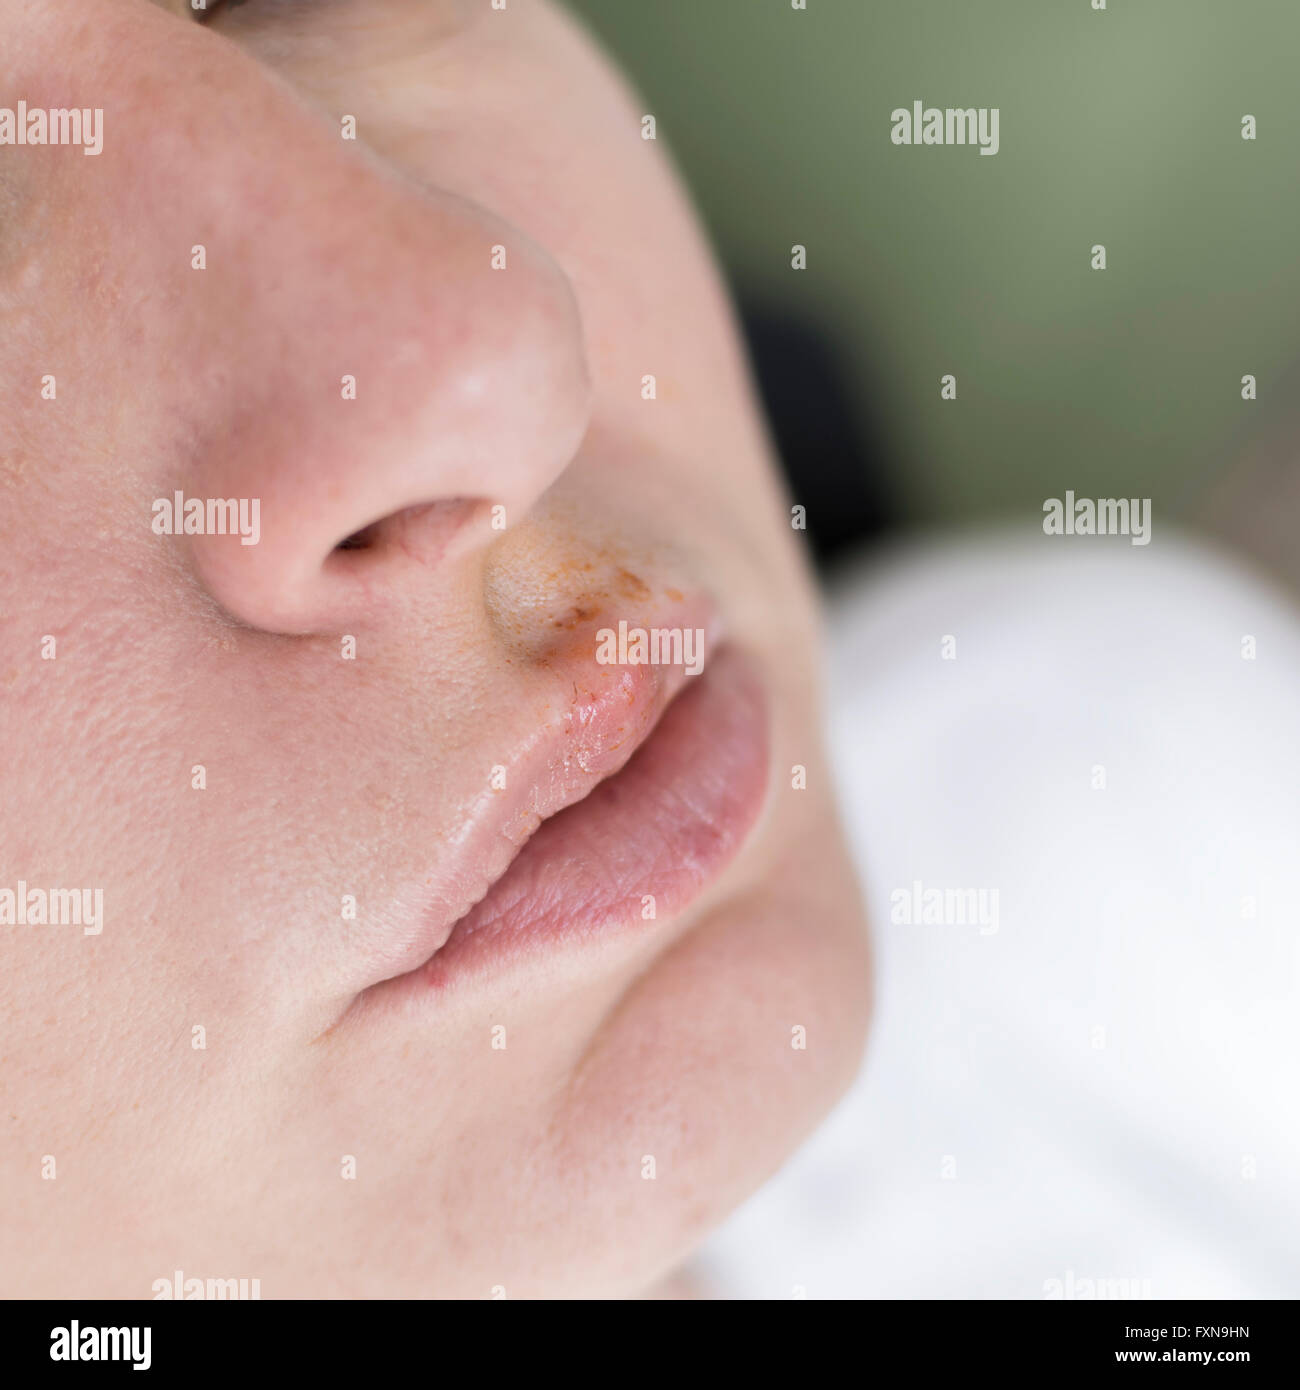 Herpes on the lips of the young woman, close up Stock Photo